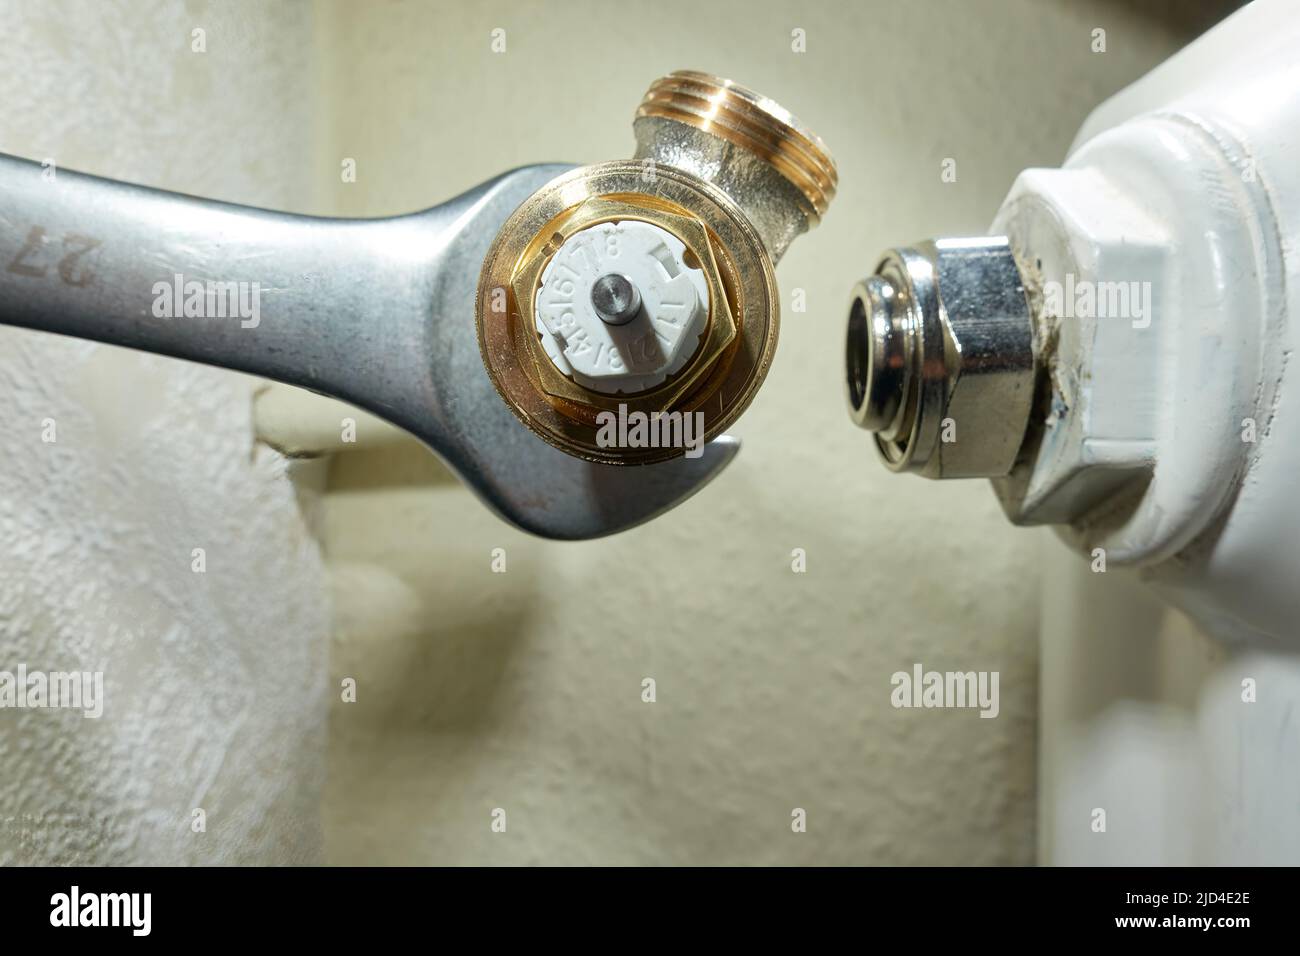 Stuttgart, Germany - February 01, 2022: Install Heimeier thermostat valve. Open-end wrench screws component to the old radiator. Modernize heating sys Stock Photo